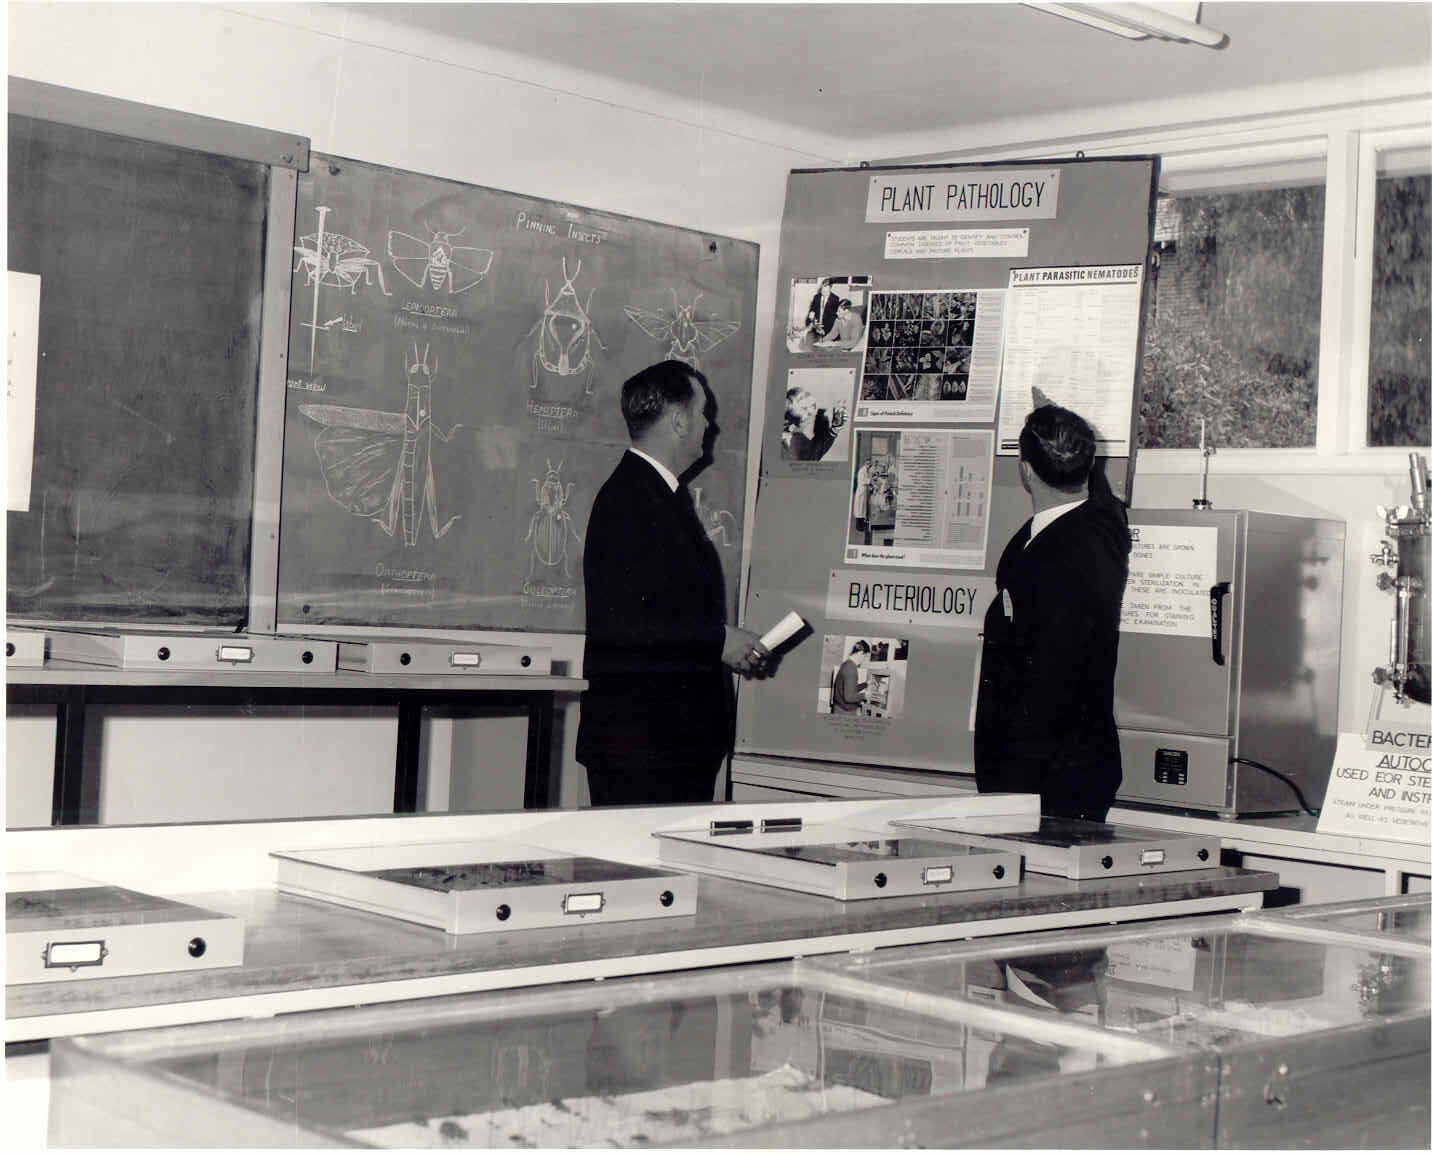 Black and white photo of two people in a classroom, pointing to a blackboard that reads "plant pathology"